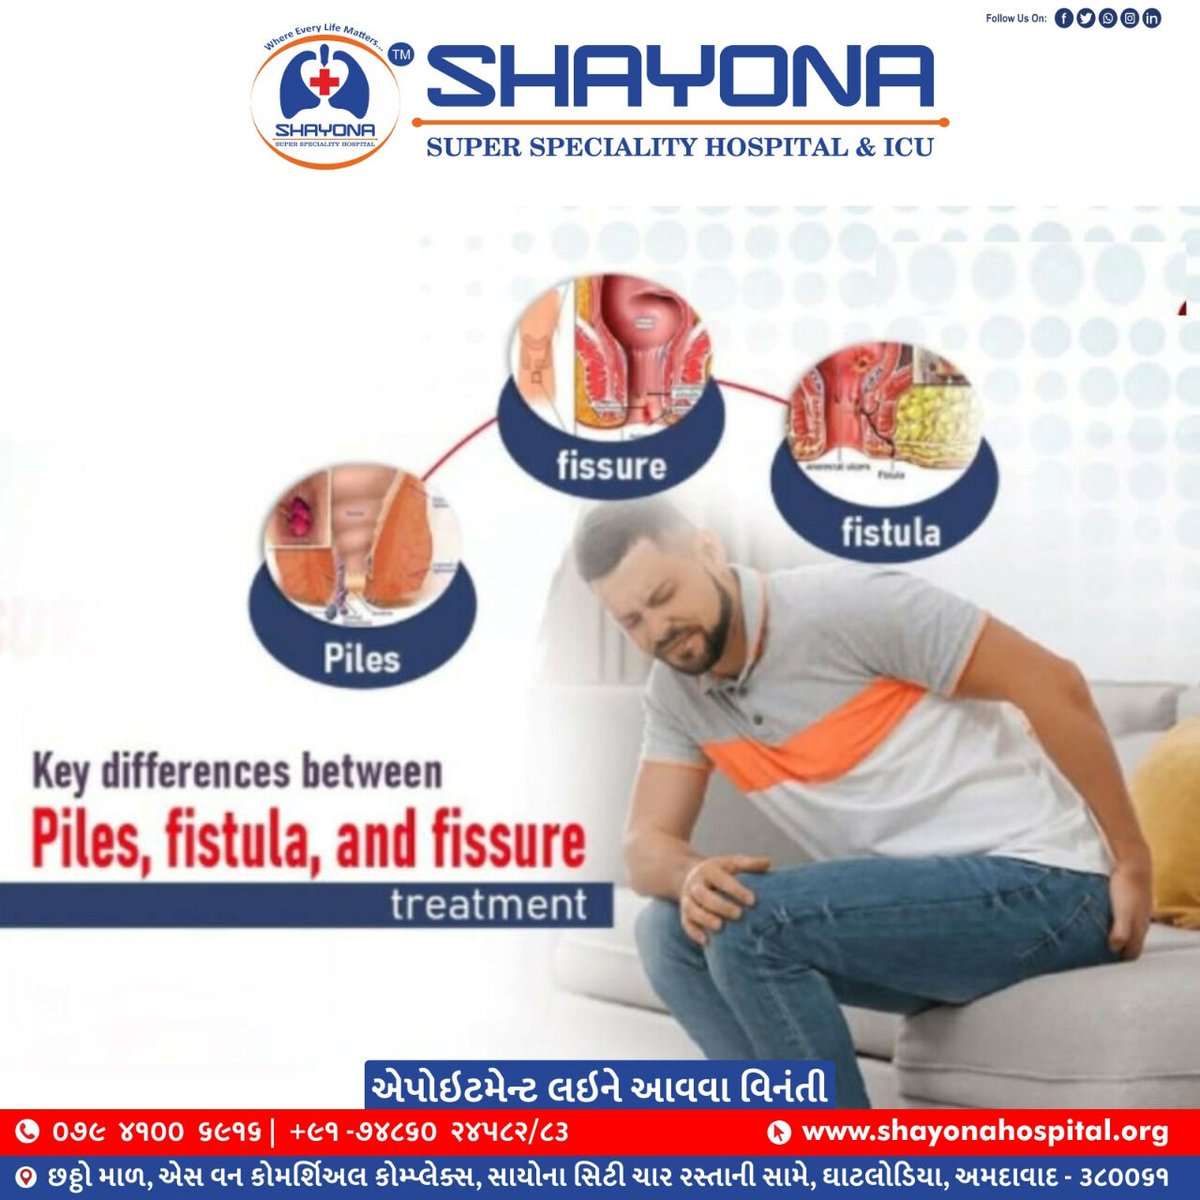 Piles, fistula and fissure treatment in ahmedabad

Without operation piles..fissure can be cured..

Book your appointment today: 079 4100 6916

#lasersurgeon #piles #pilestreatment #pilestreatmentinahmedabad #fissure #fistula #fistulatreatment #expertdoctors #pilessurgery